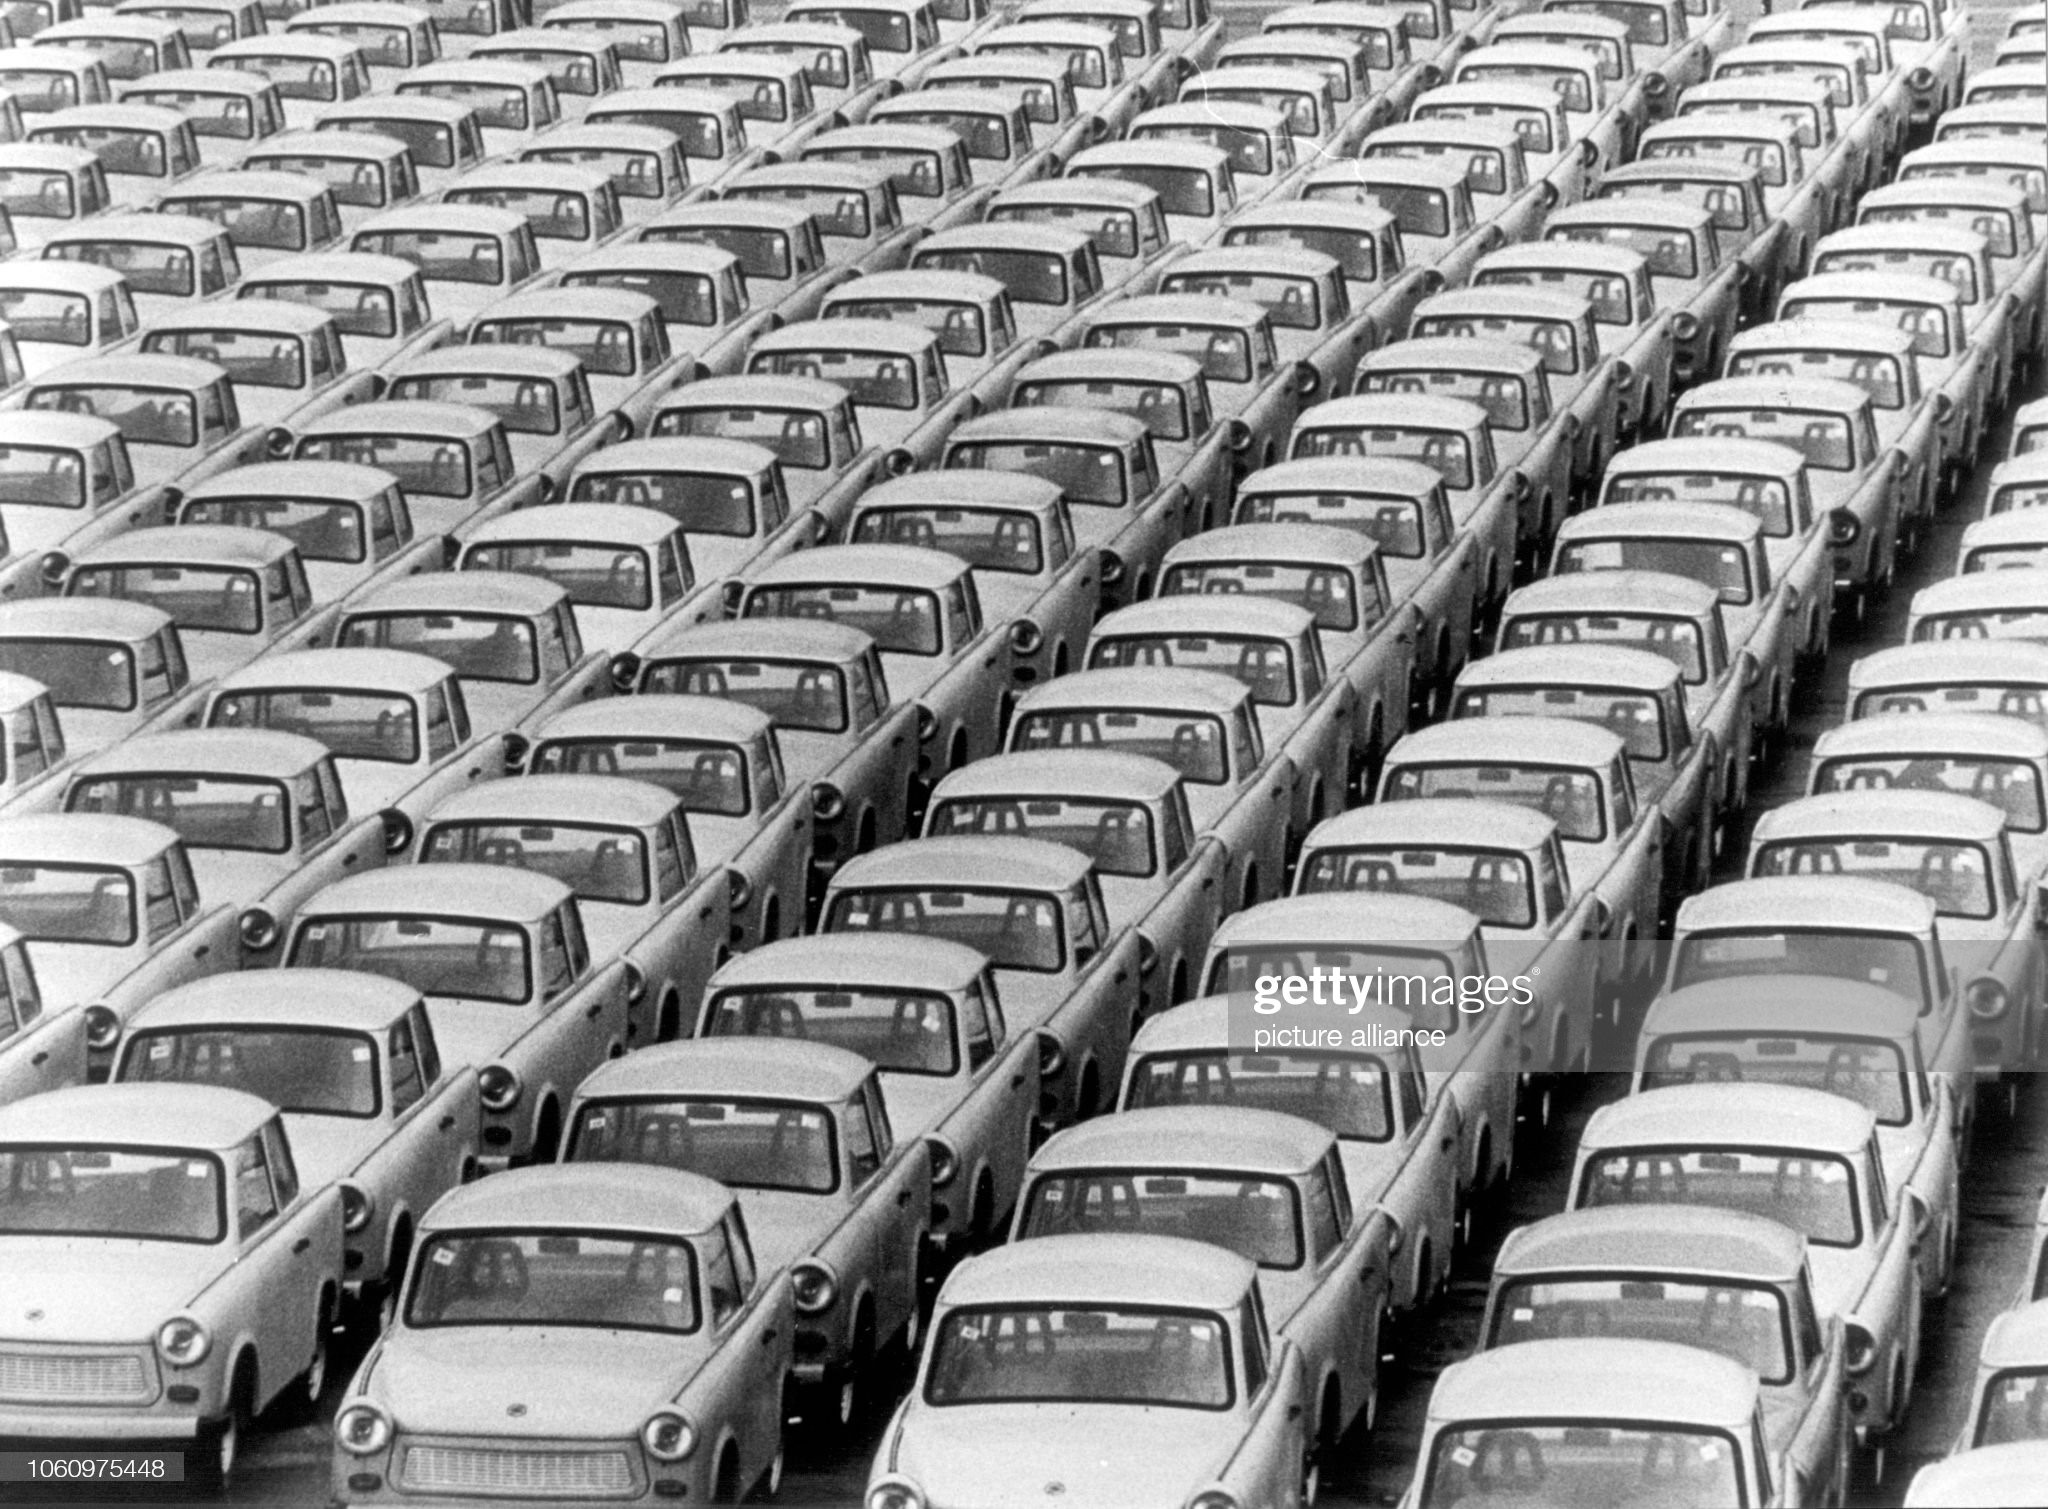 November 22, 1990. Hundreds of Trabants have been parked in a parking lot in Rostock's overseas port for months, as if ordered and not picked up. 